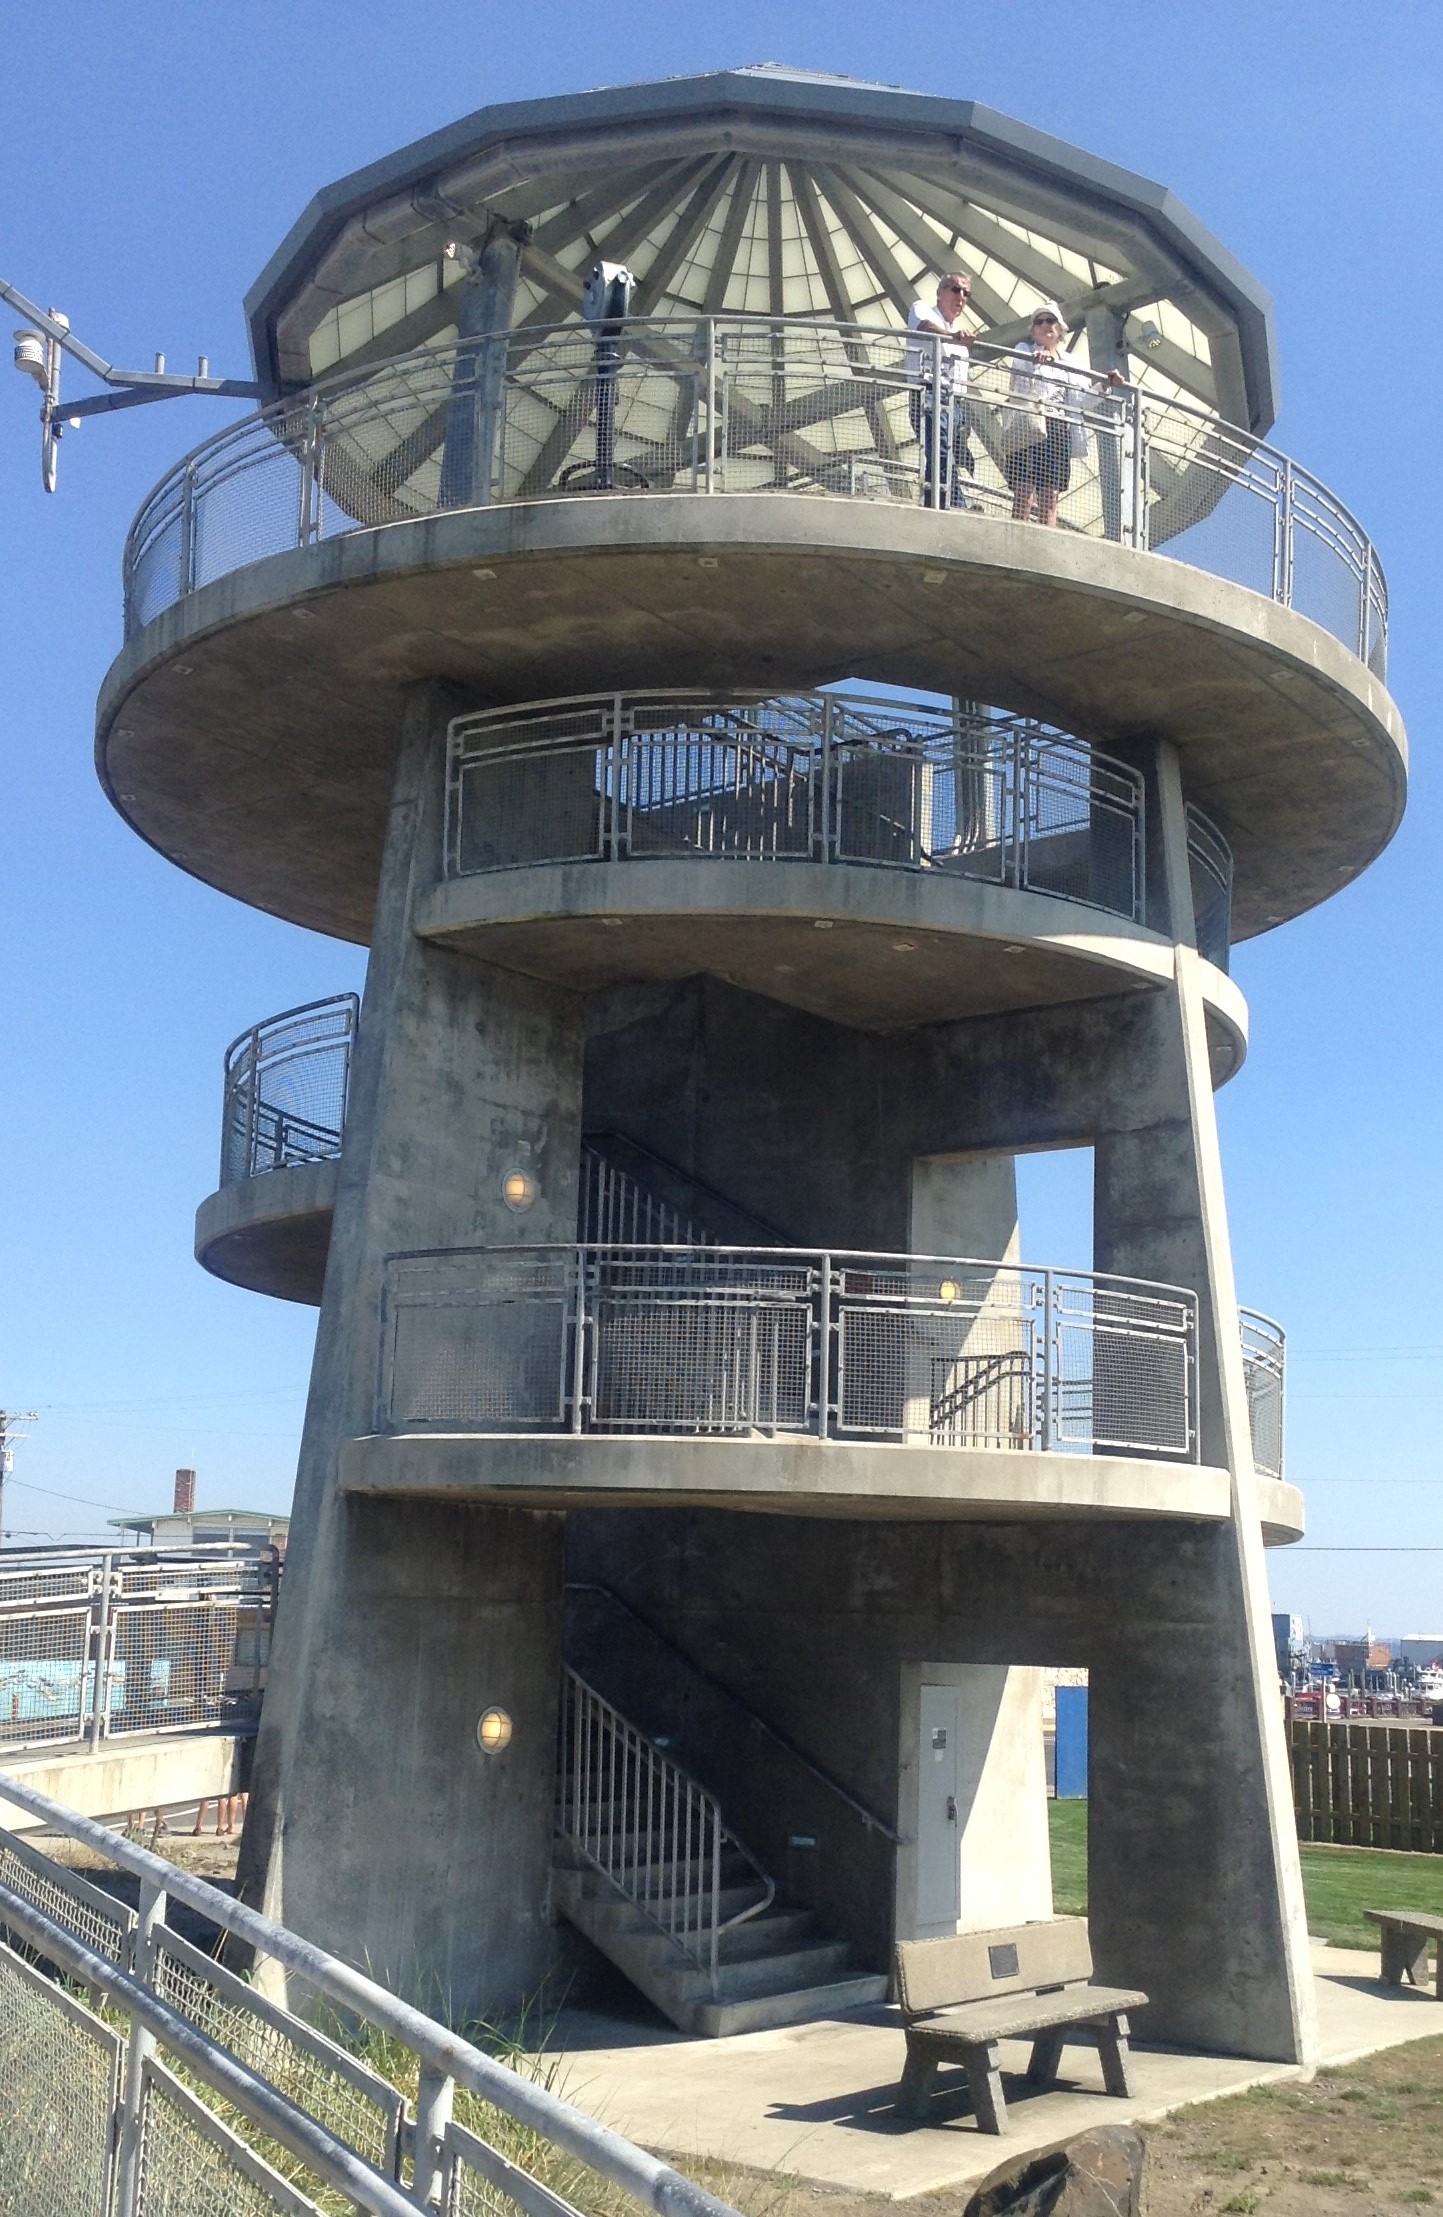 Viewing Tower in Westport, WA- offering amazing views of the Pacific Ocean and the Westport Marina, with distant views of OCean Shores, WA which is divided by the Mouth of Grays Harbor.